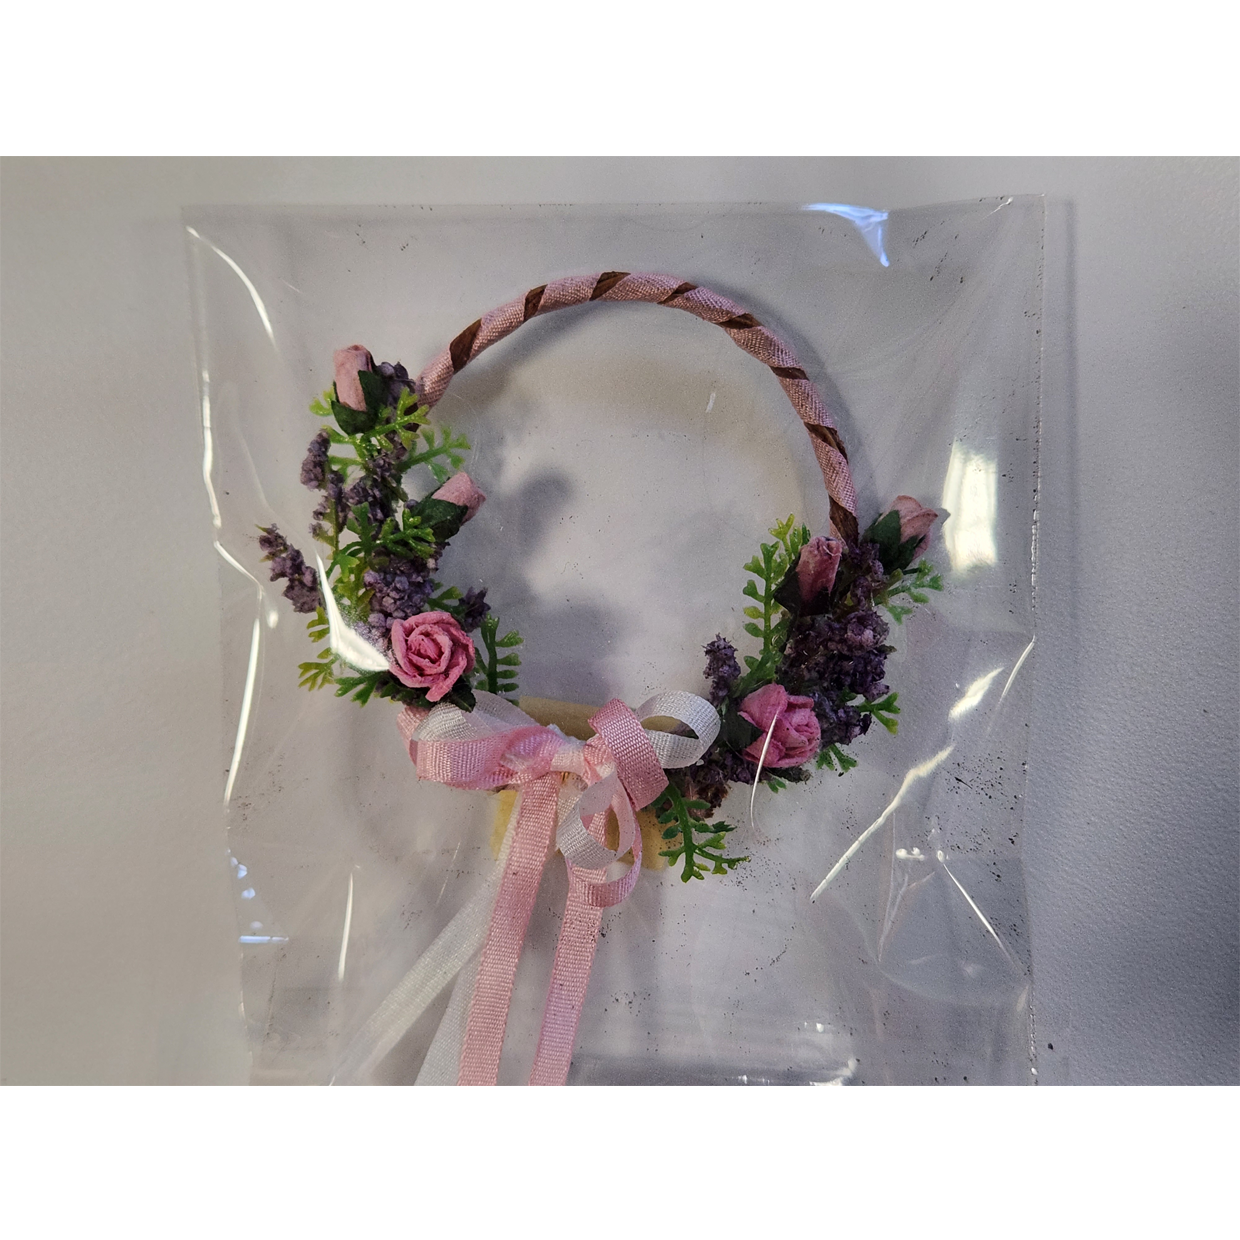 1 Inch Scale Decorated Lavender and Rose Wreath Dollhouse Miniature